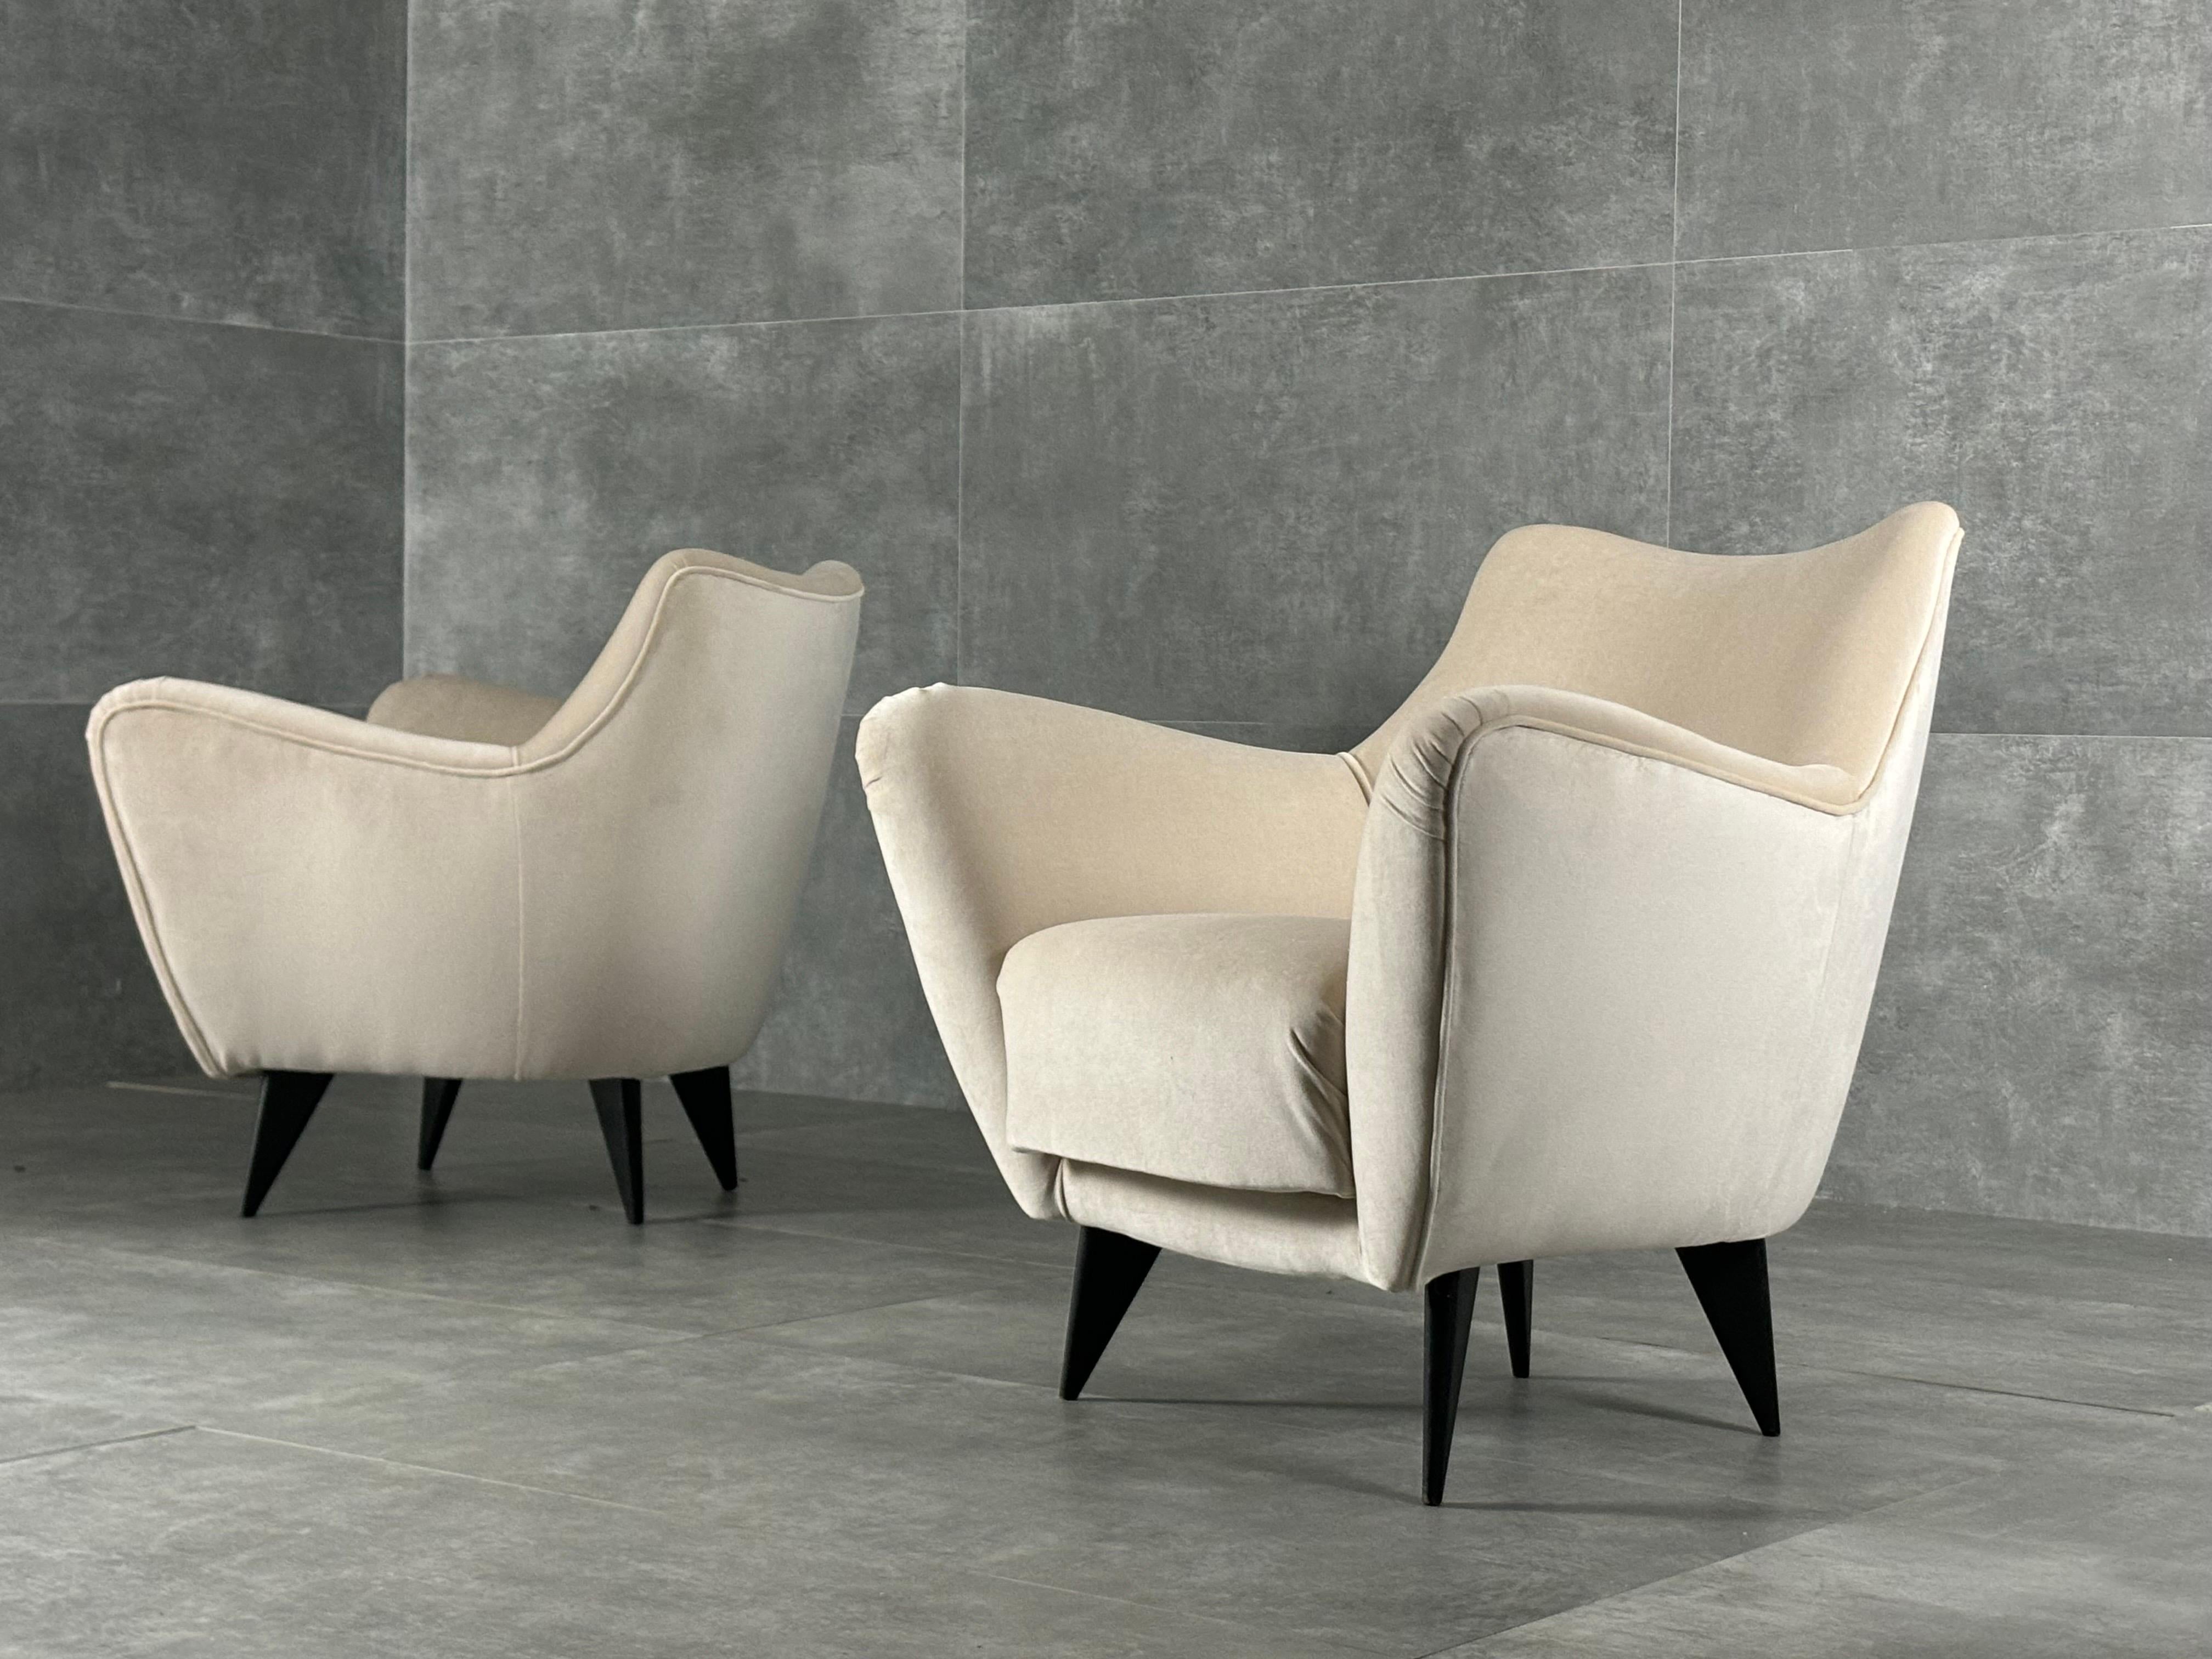 Armchairs by Guglielmo Veronesi for ISA Bergamo, Italy, 1950s. These armchairs are newly upholstered with ivory velvet.